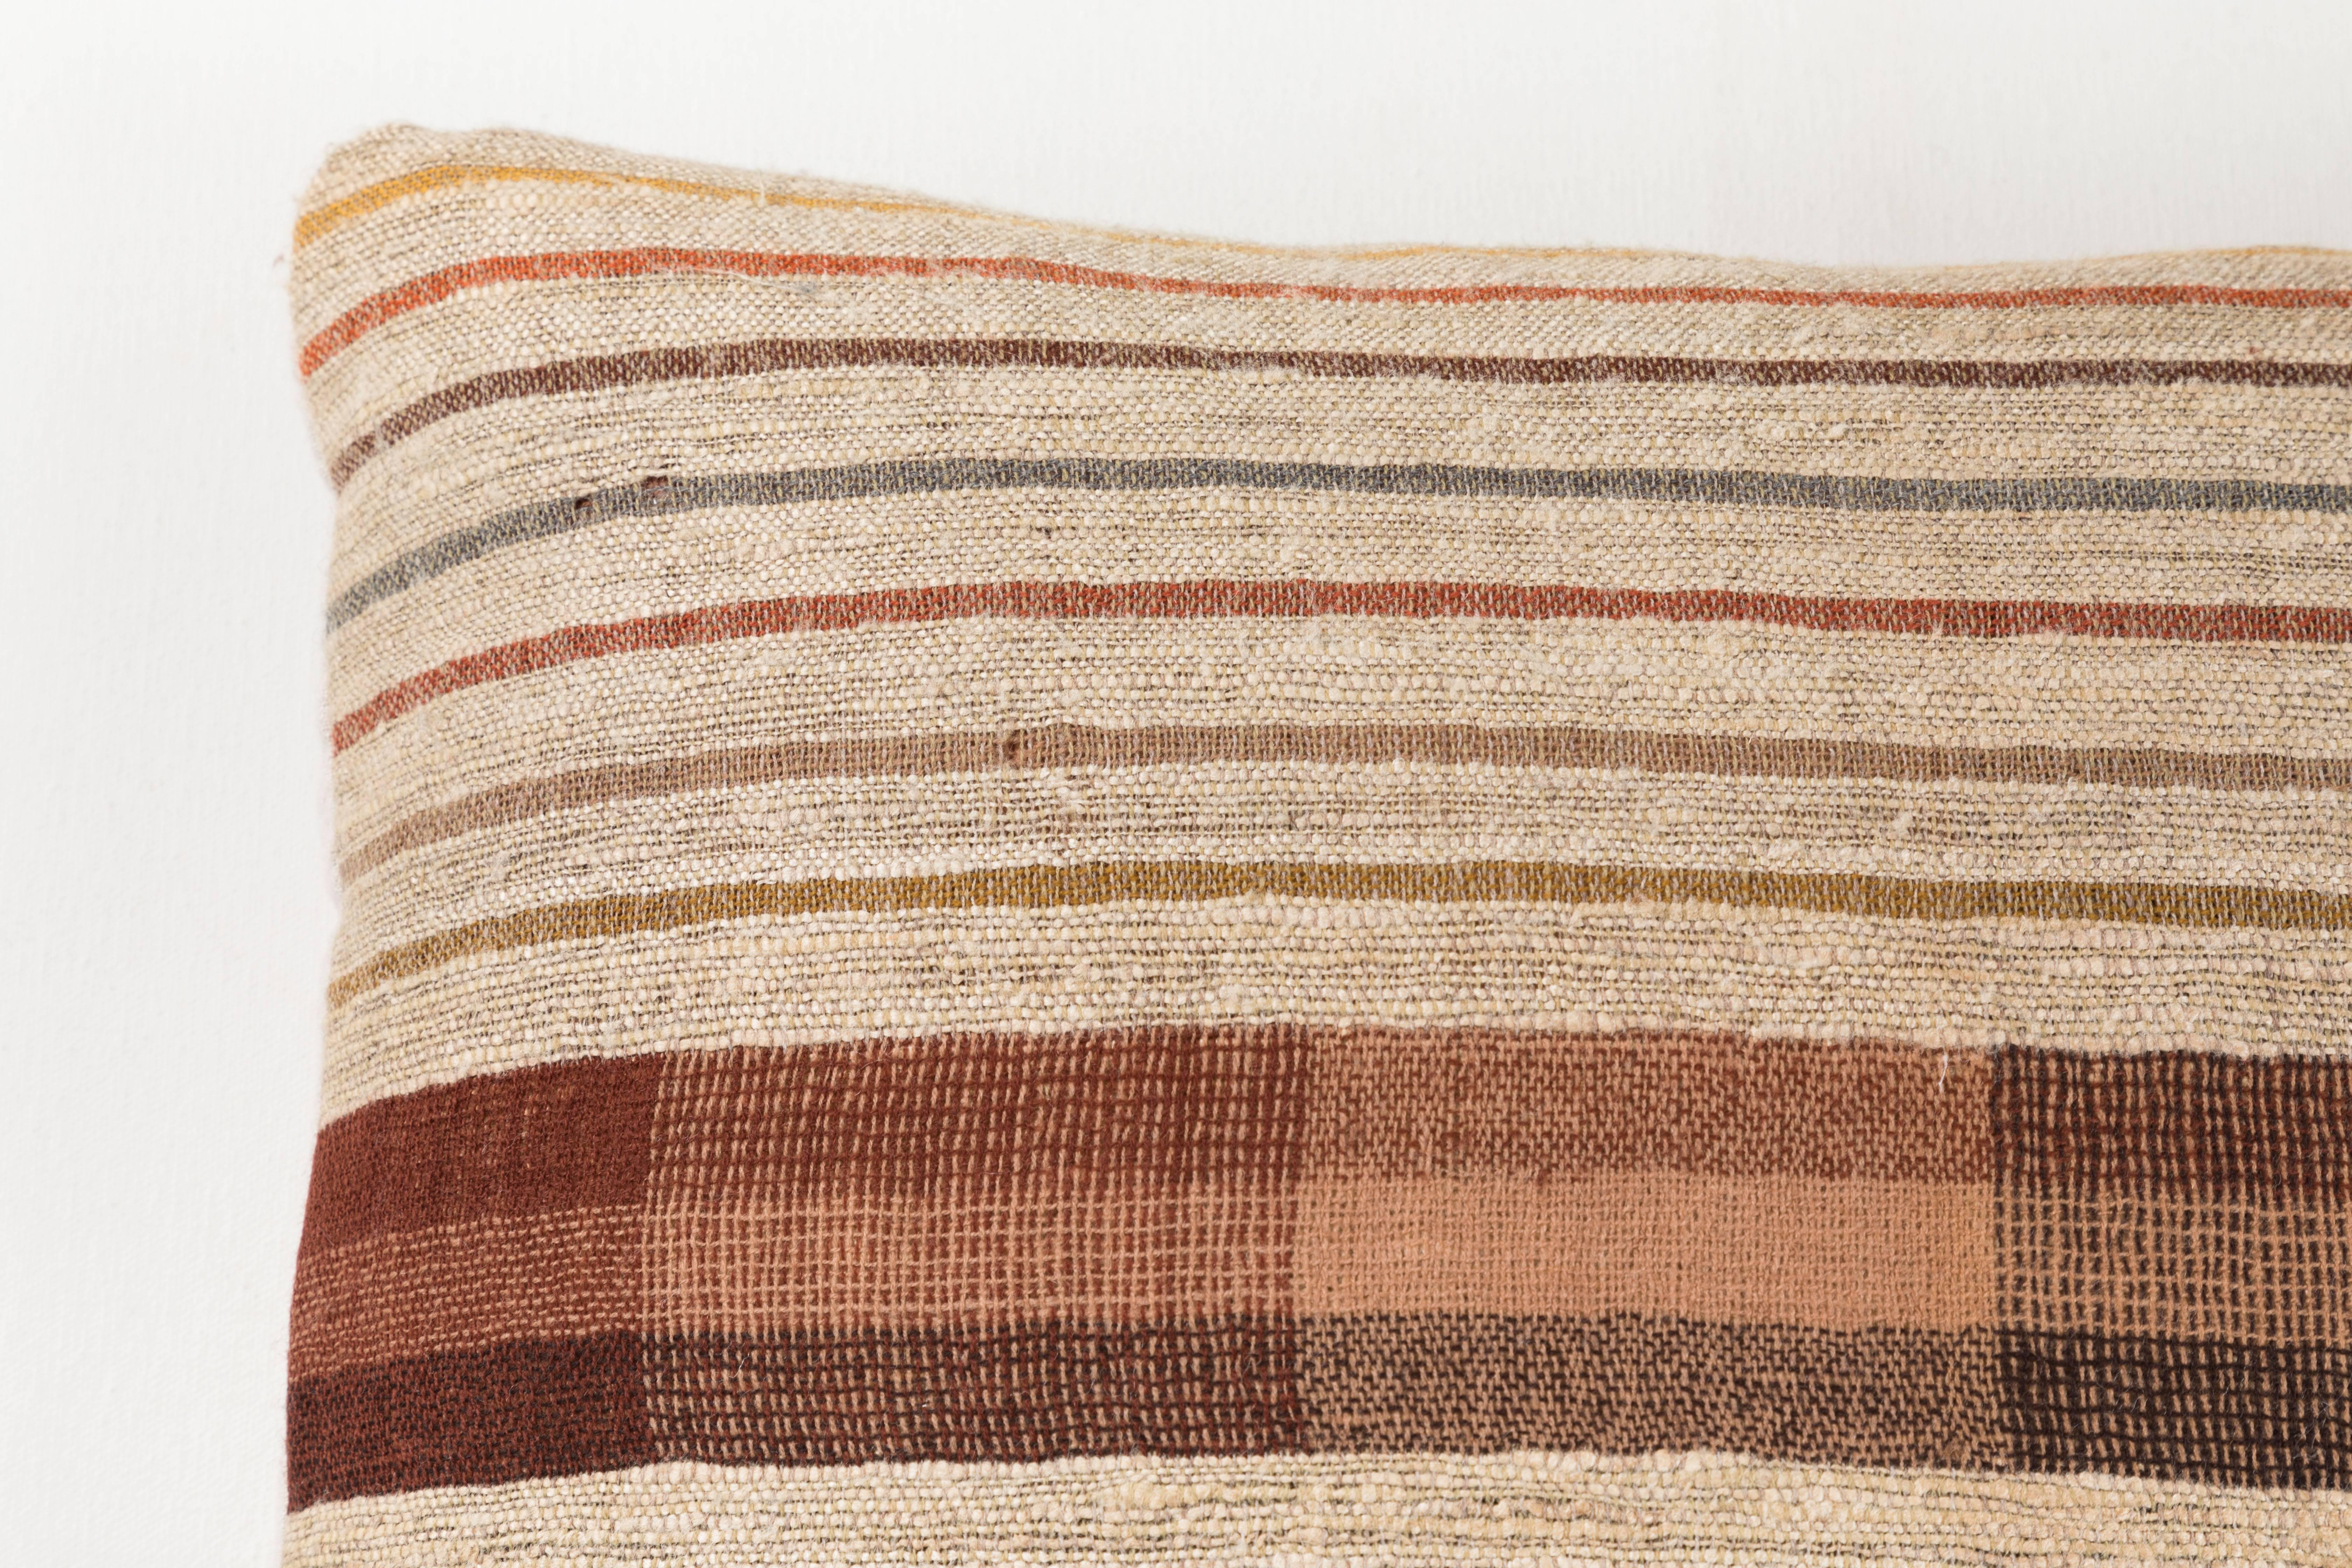 Pat McGann workshop

A contemporary line of cushions, pillows, throws, bedcovers, bedspreads and yardage hand woven in India on antique Jacquard looms. Hand spun wool, cotton, linen, and raw silk give the textiles an appealing uneven quality.